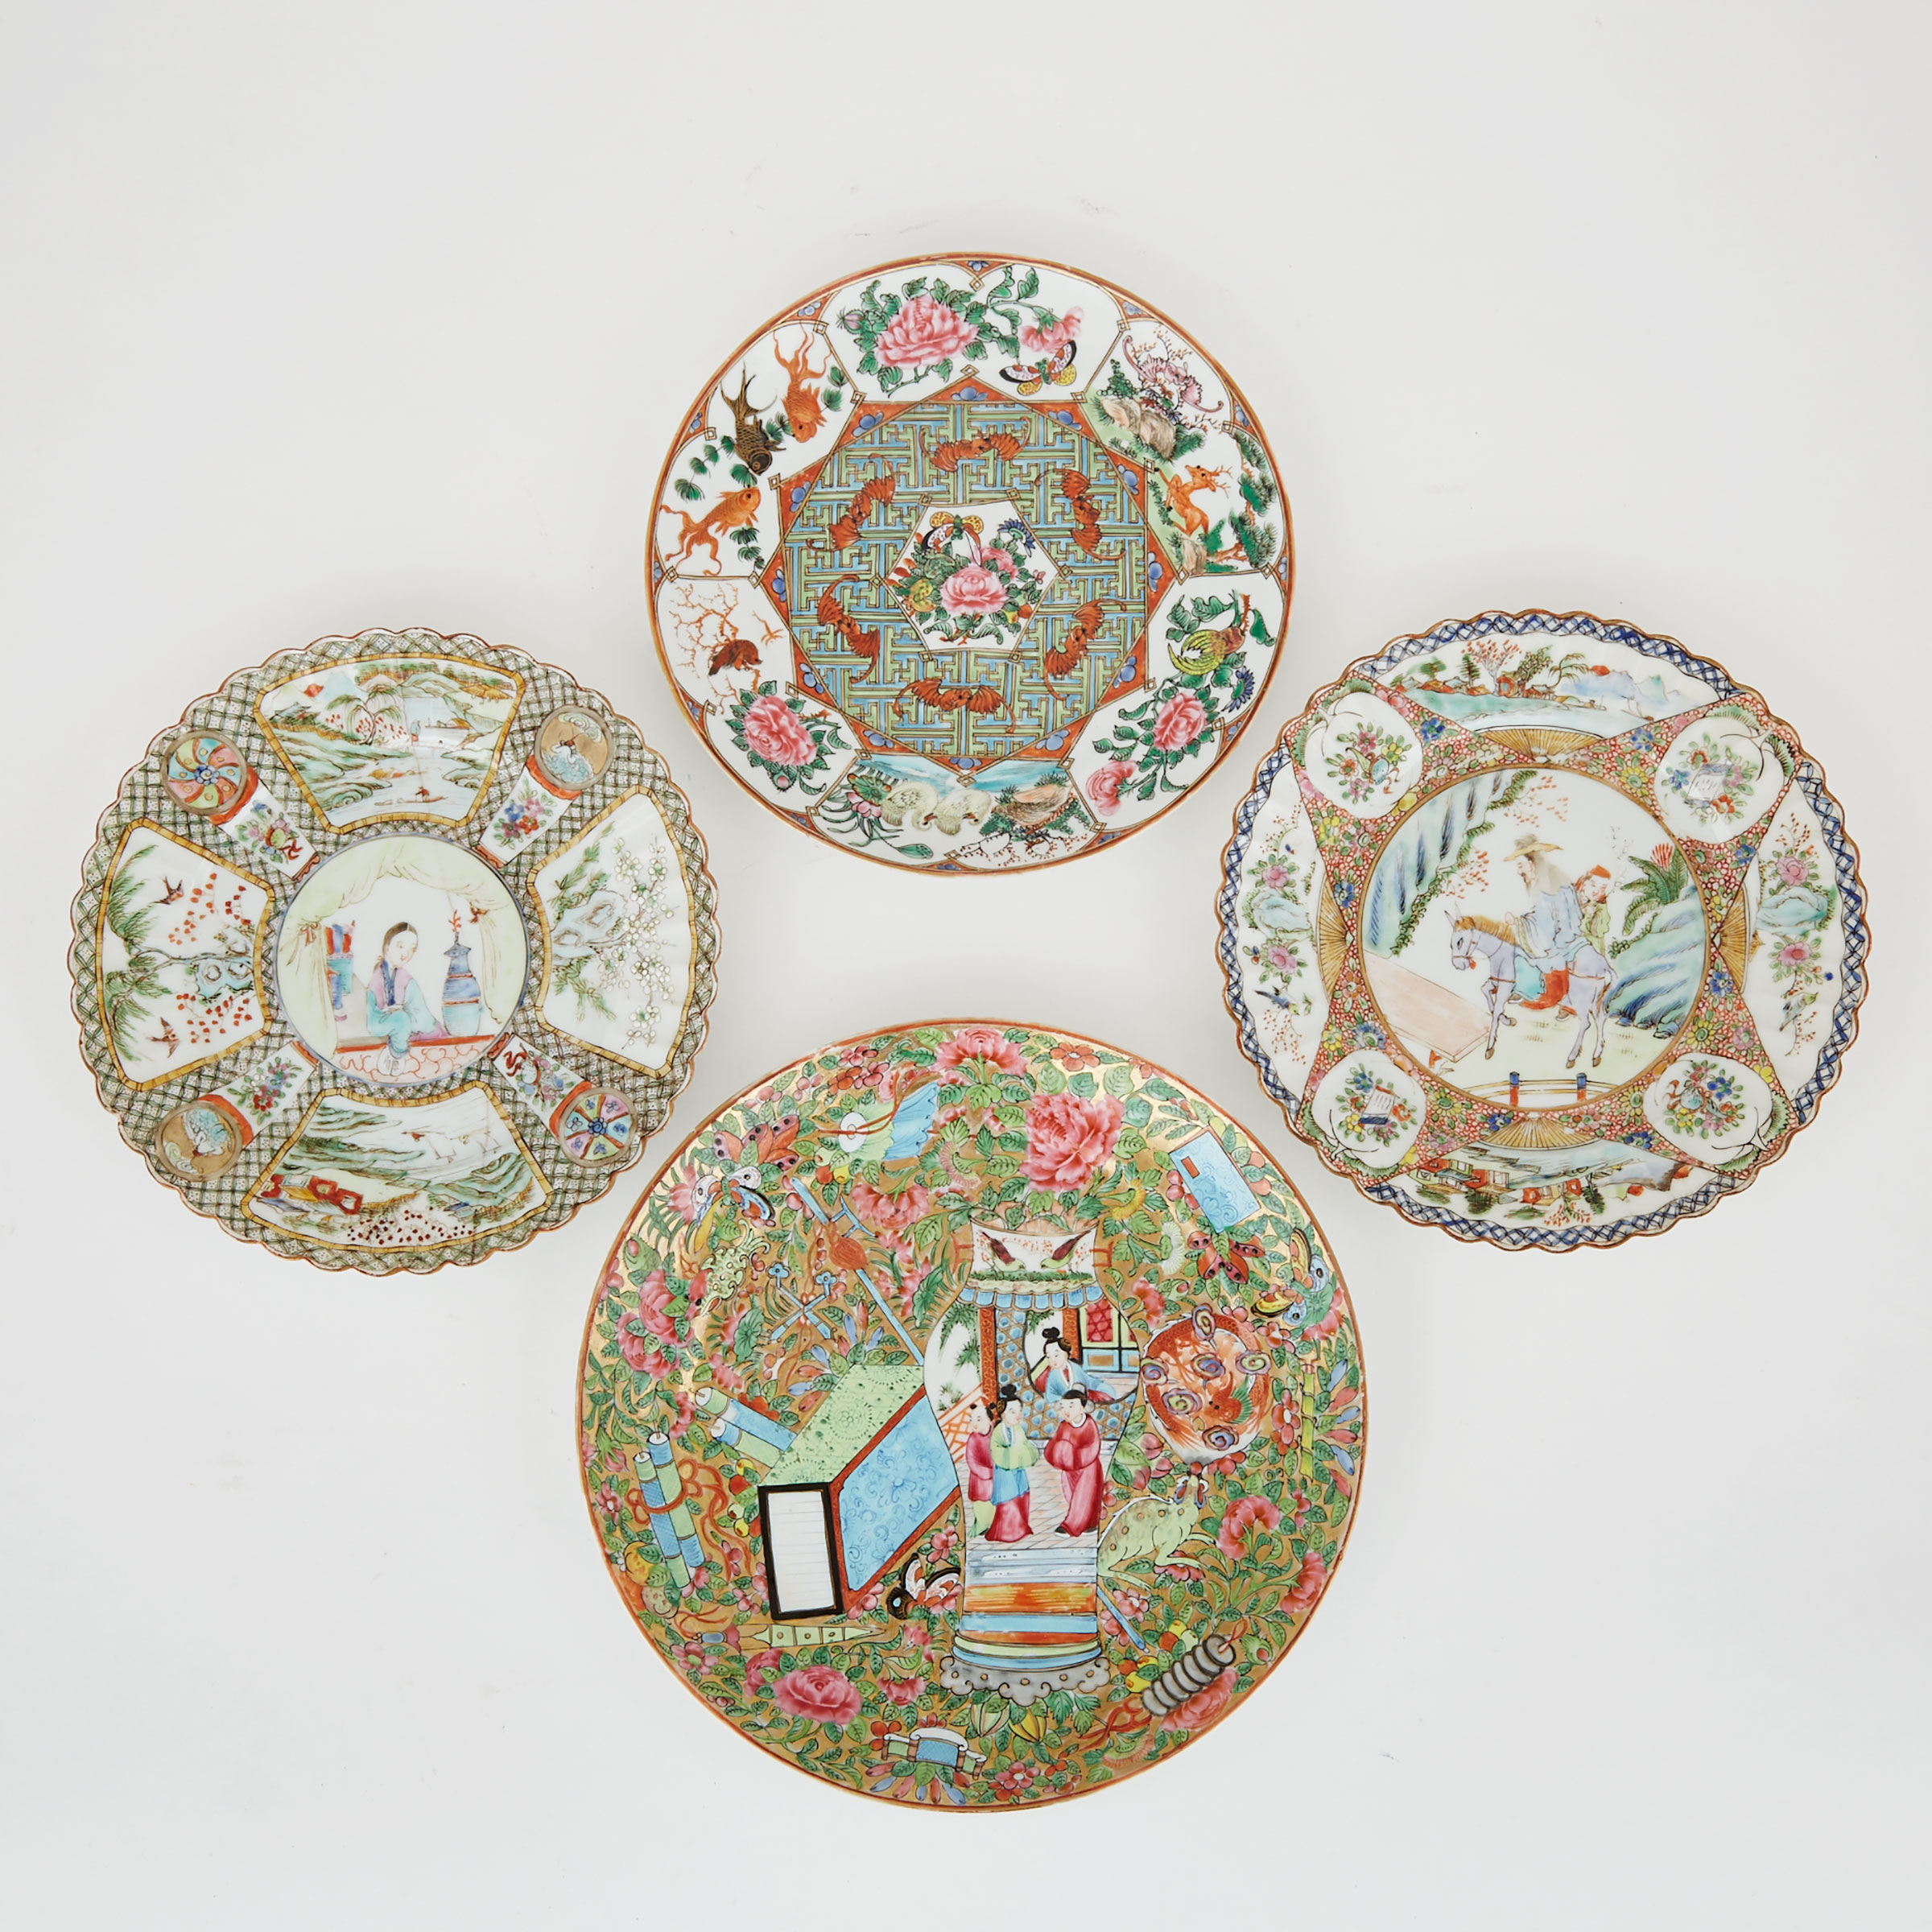 Four Chinese Export Polychrome Decorated Porcelain Plates, 19th century